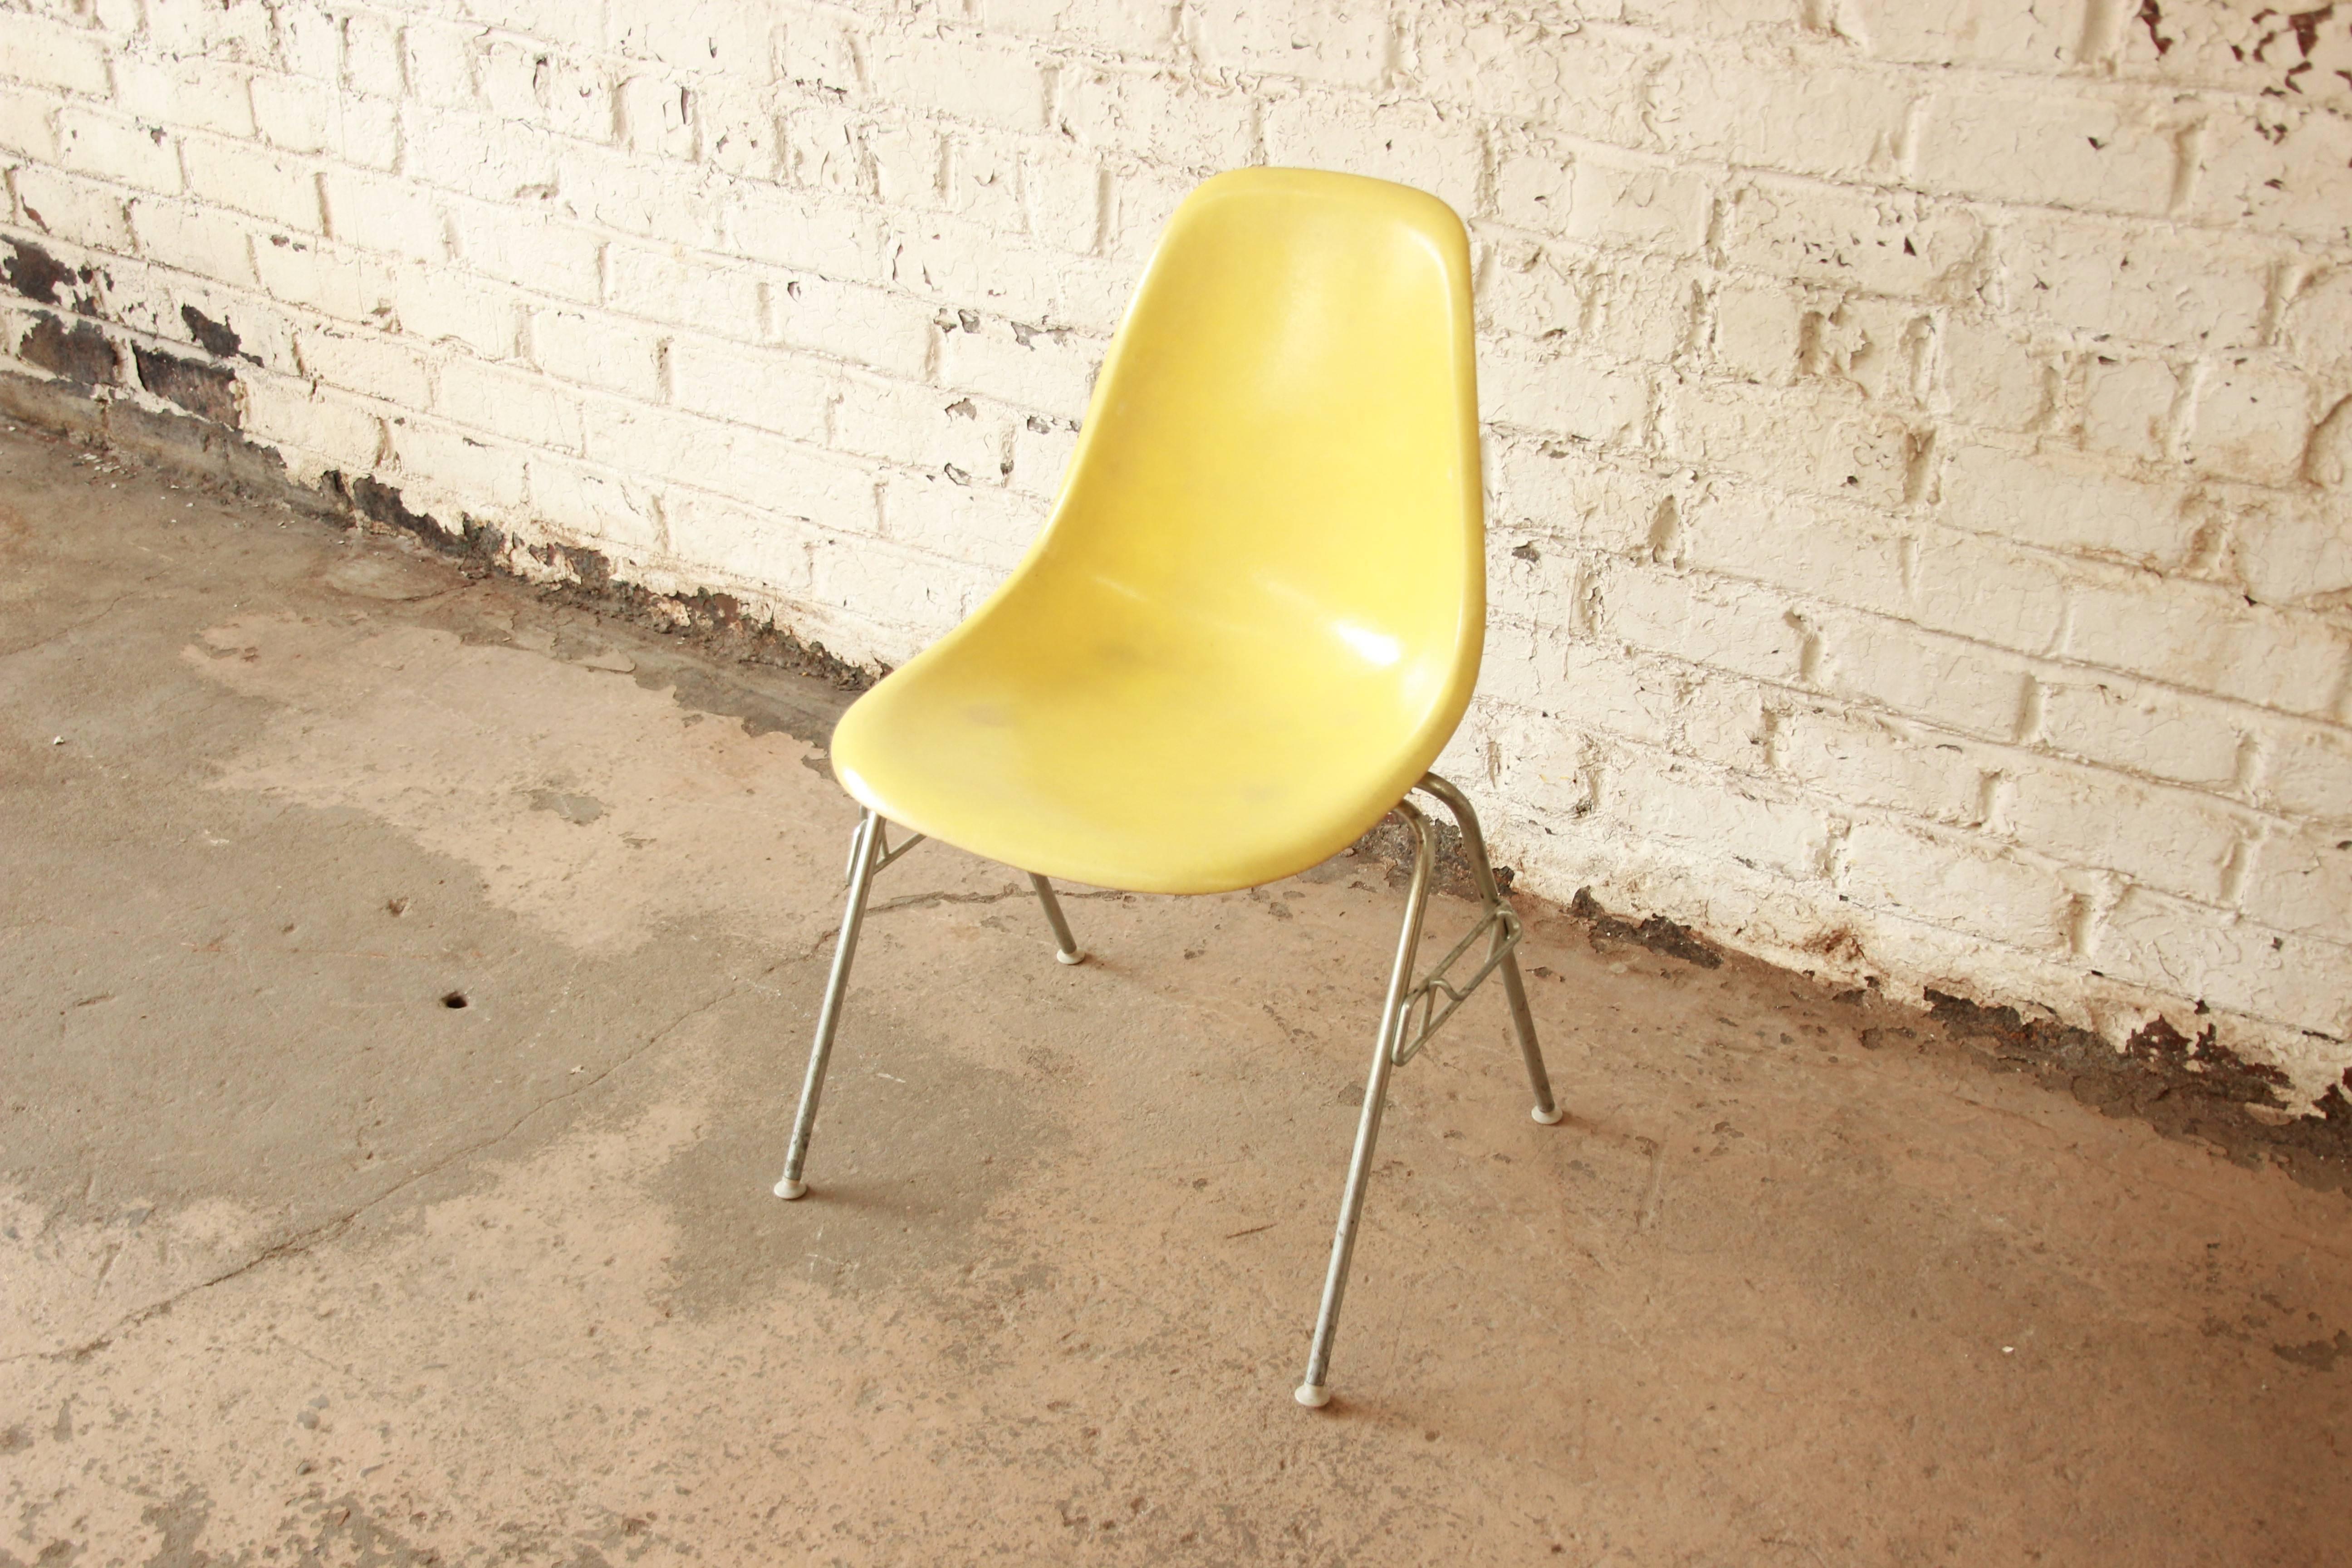 Yellow fiberglass stackable DSS chairs designed by Charles & Ray Eames for Herman Miller. The shell chairs have an unmistakable design and offer a multitude of uses. Chairs have original bases and all shells have embossed Herman Miller logo with